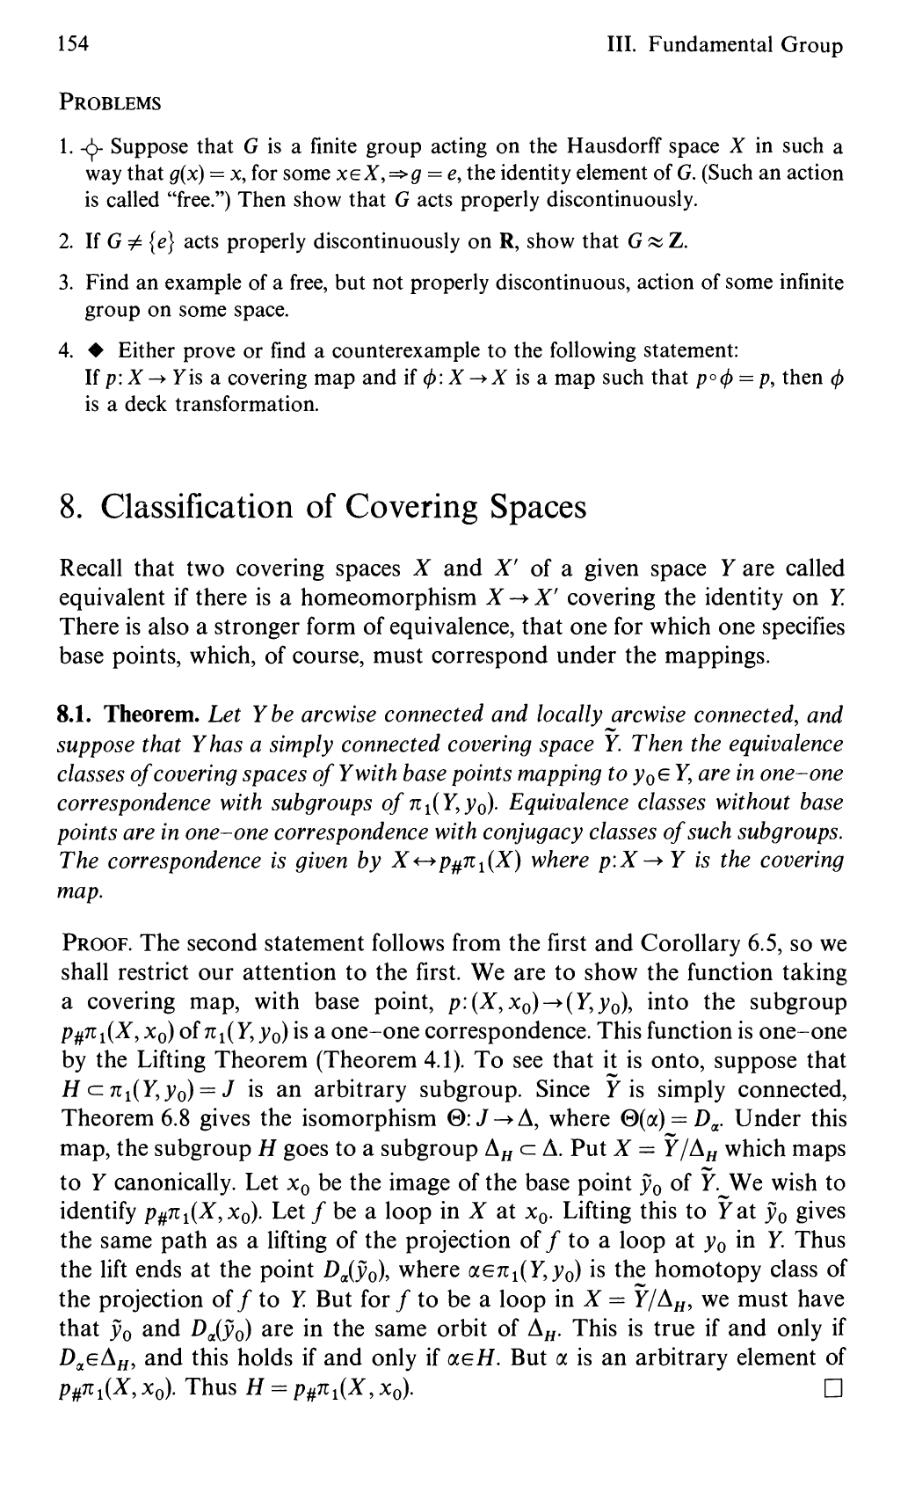 8. Classification of Covering Spaces